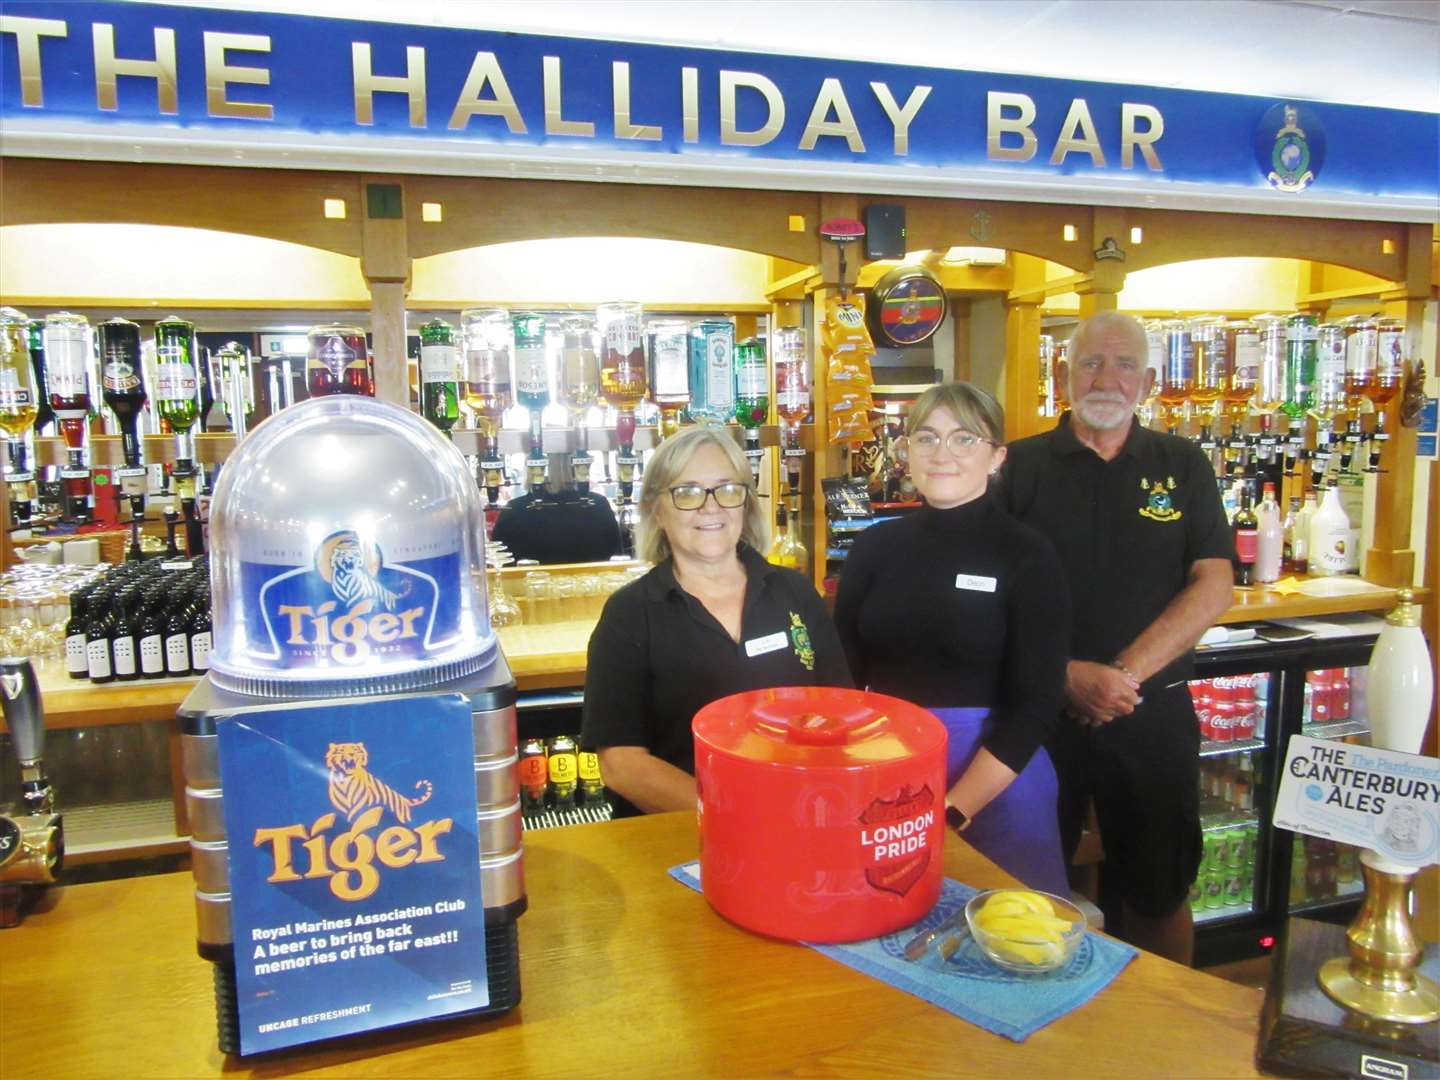 Ready to serve: The RMA Club's bar staff behind the refurbished Halliday bar: Linda Bennett (Manager) Deon Young and John Woodward who is also a branch member.